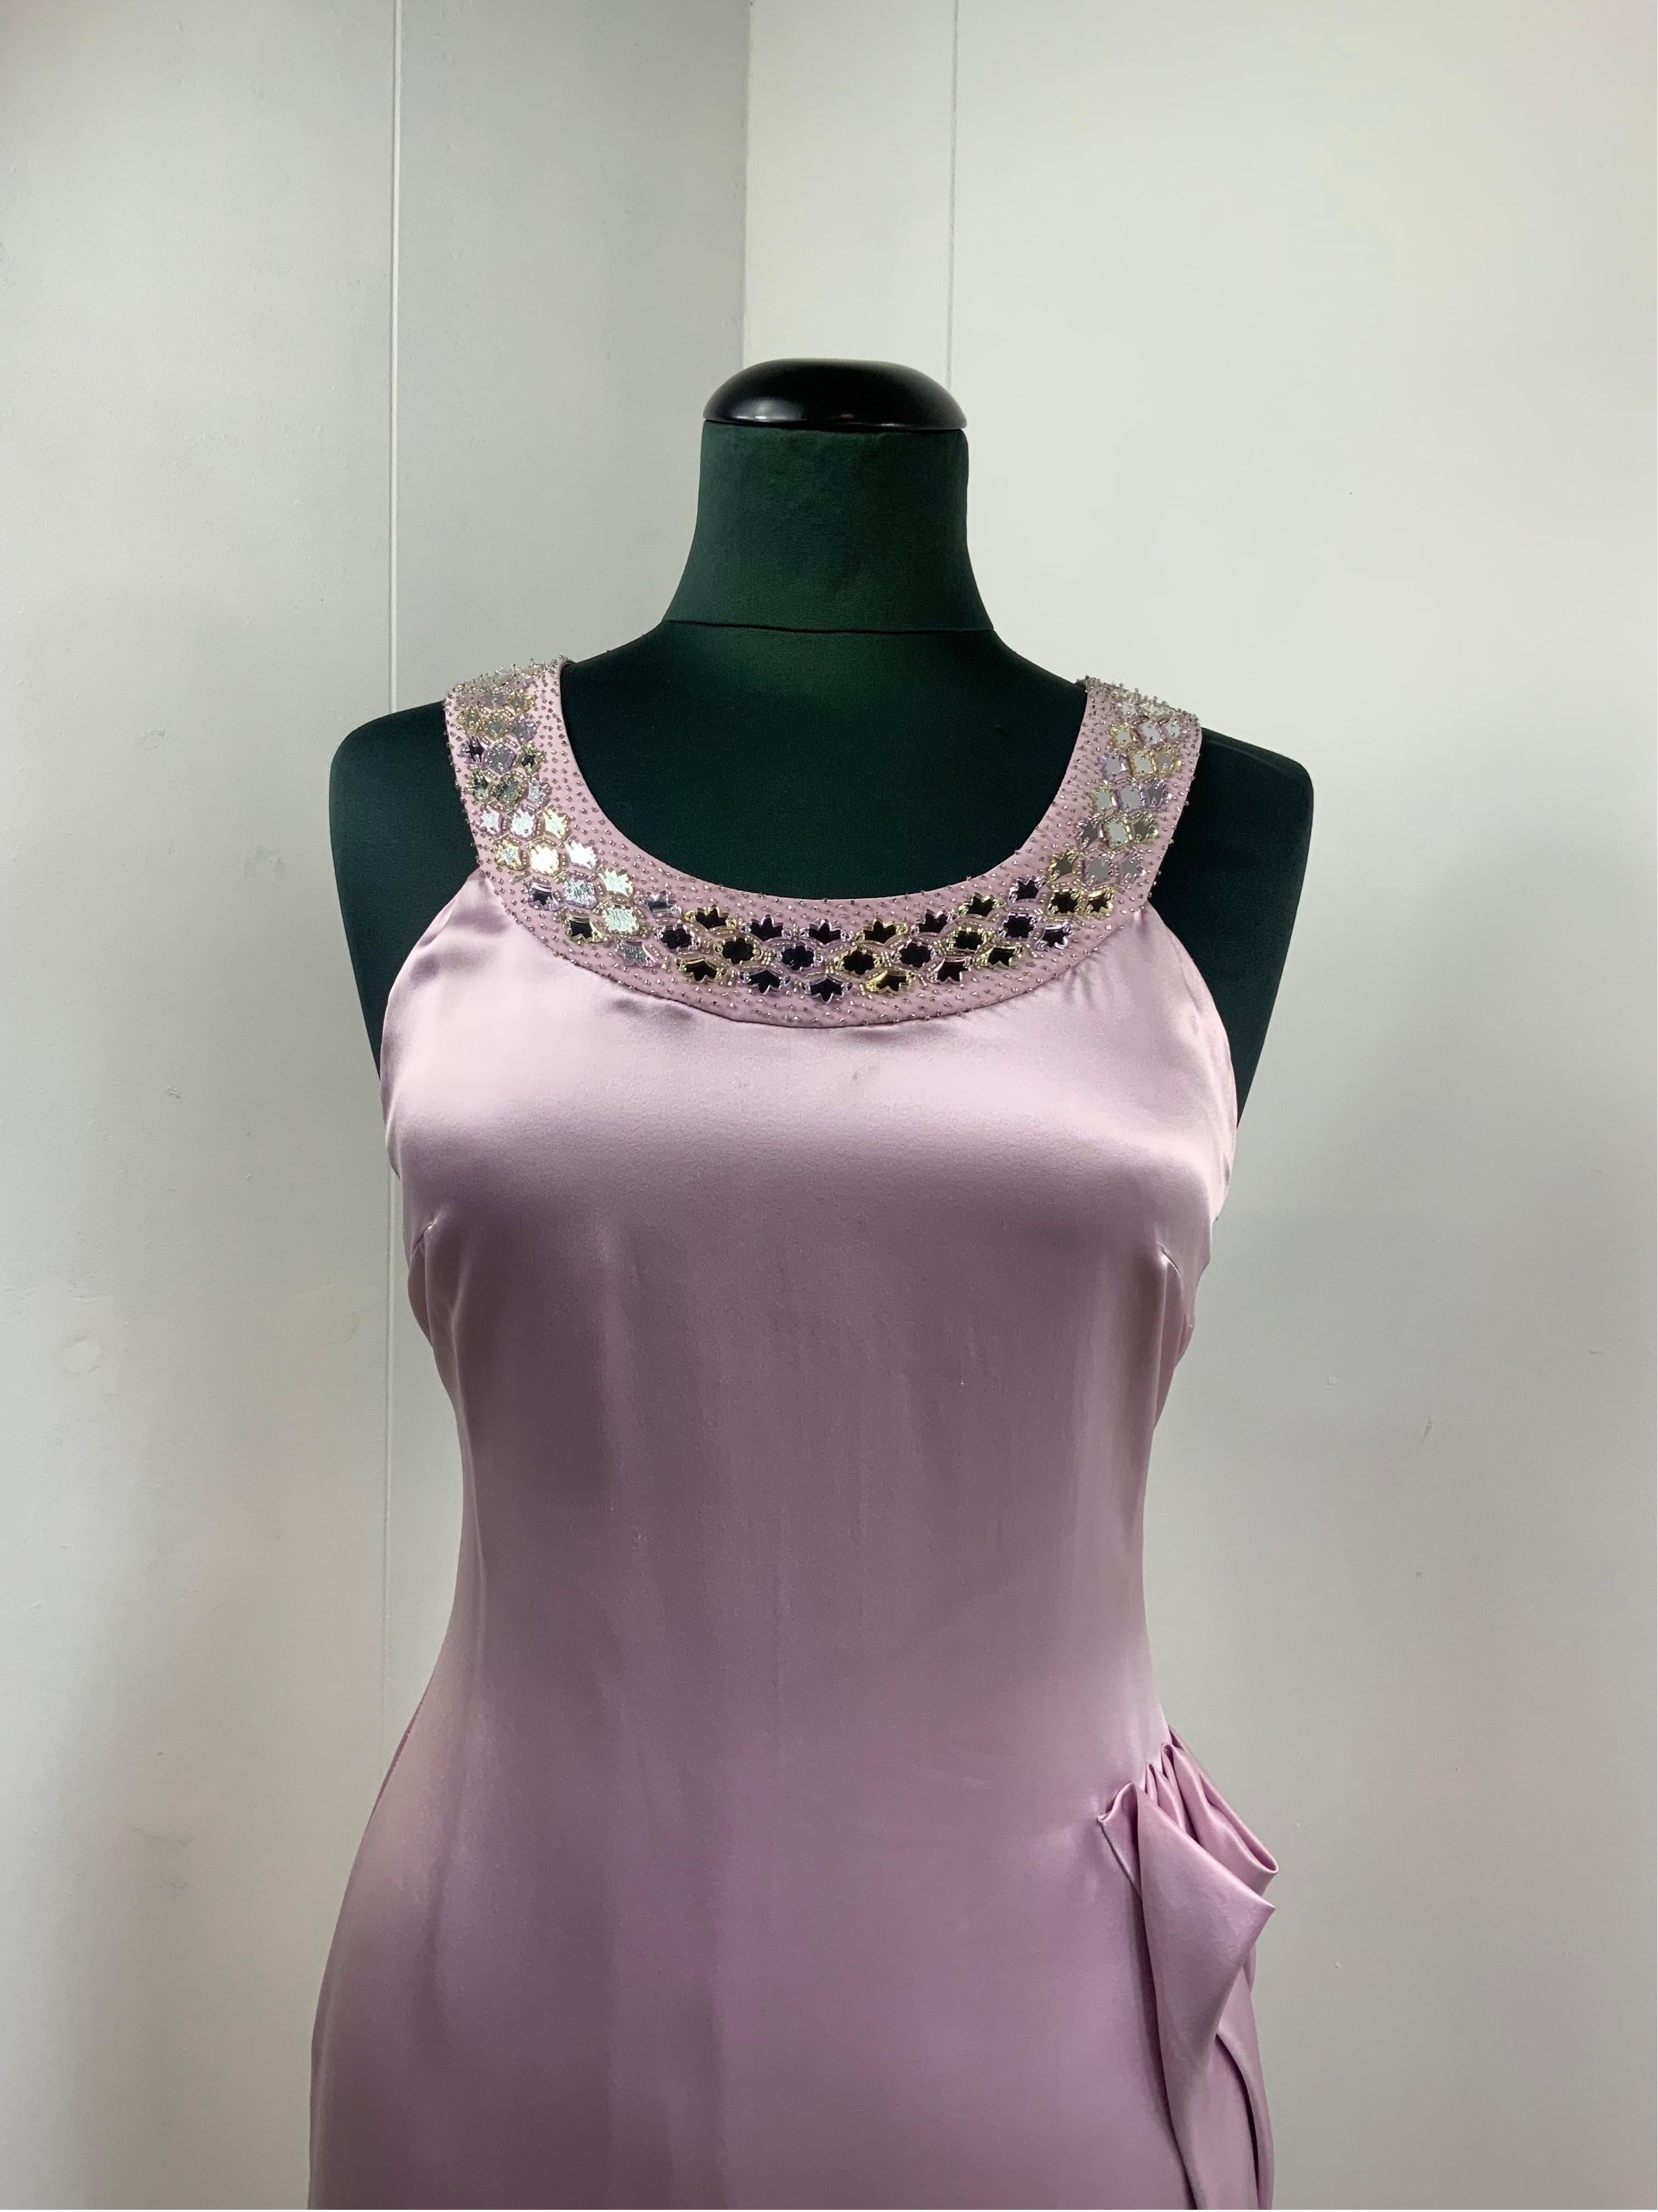 Versace dress.
Crafted in lilac silk.
Sequined applications on the neckline.
Italian size 40.
Bust 37cm
Length 105 cm
In good general condition, it shows signs of normal use. A few small spots not very visible in the photos and some pulled